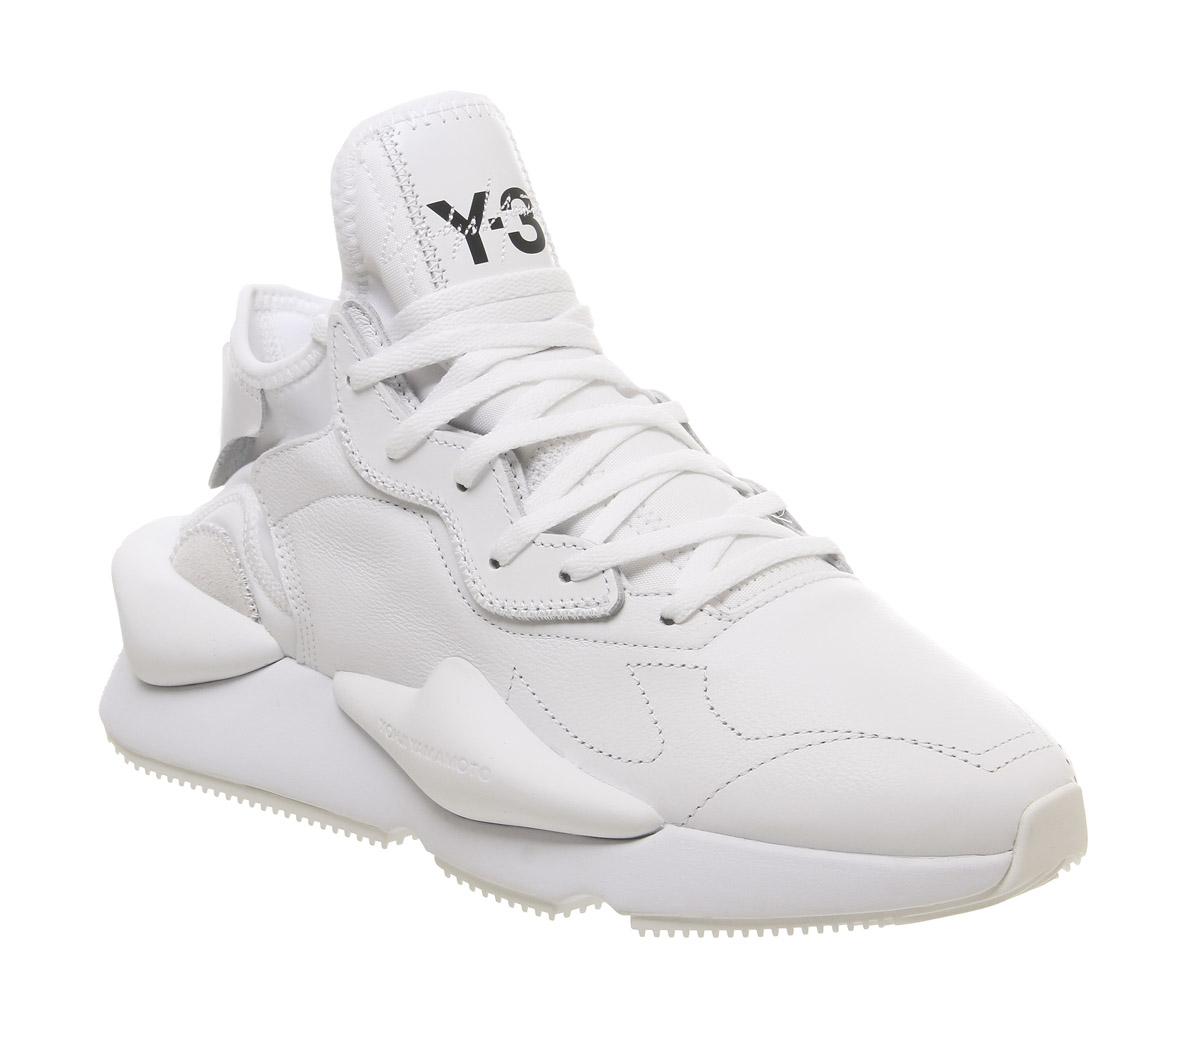 adidas Y3 Y3 Kaiwa Trainers White Leather - His trainers